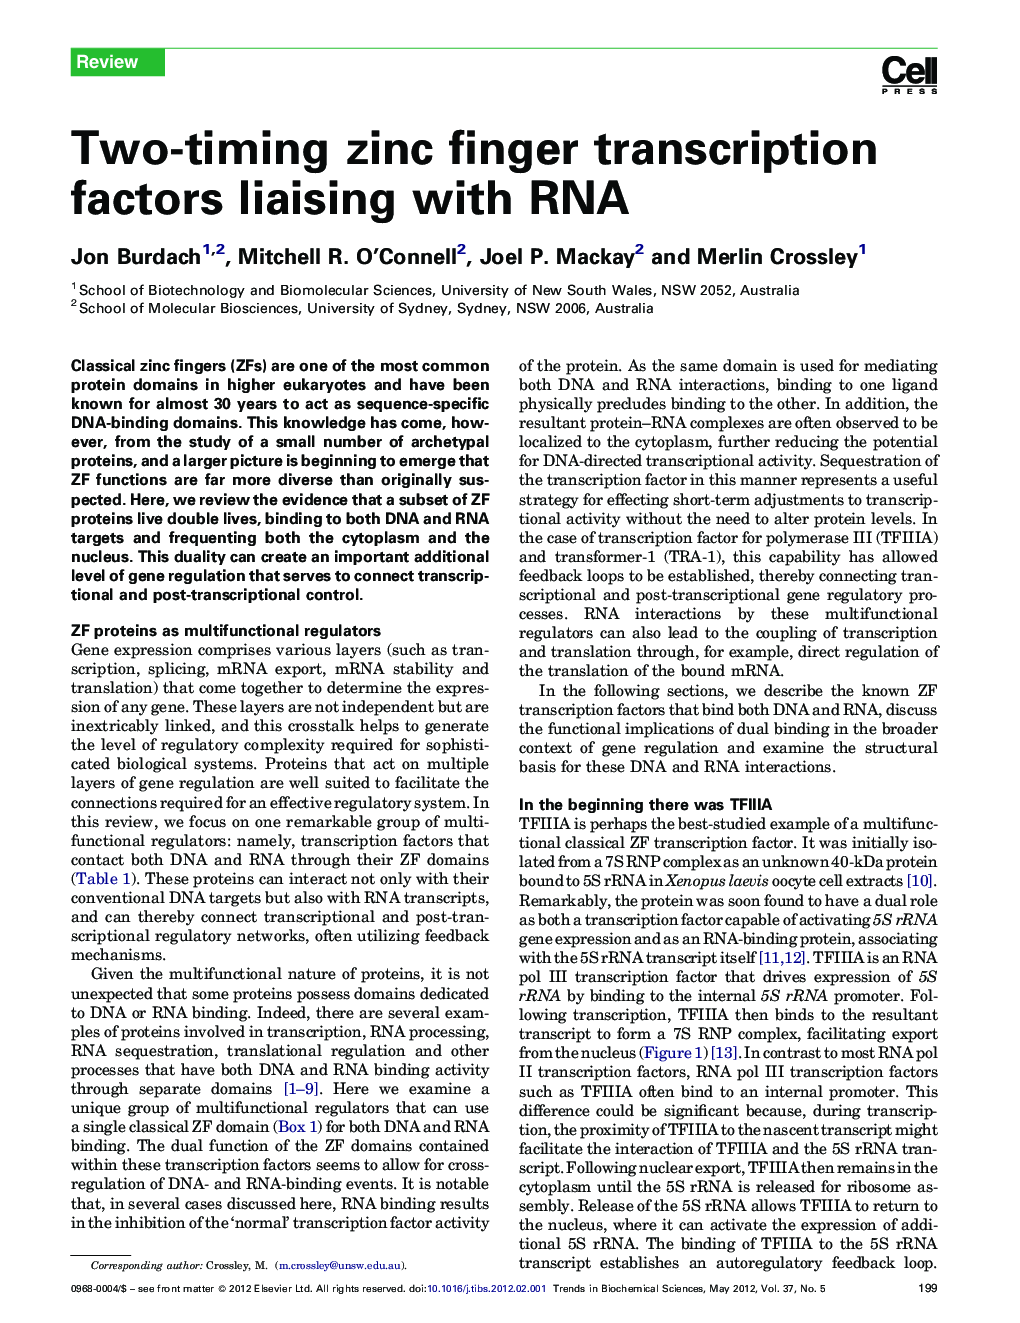 Two-timing zinc finger transcription factors liaising with RNA